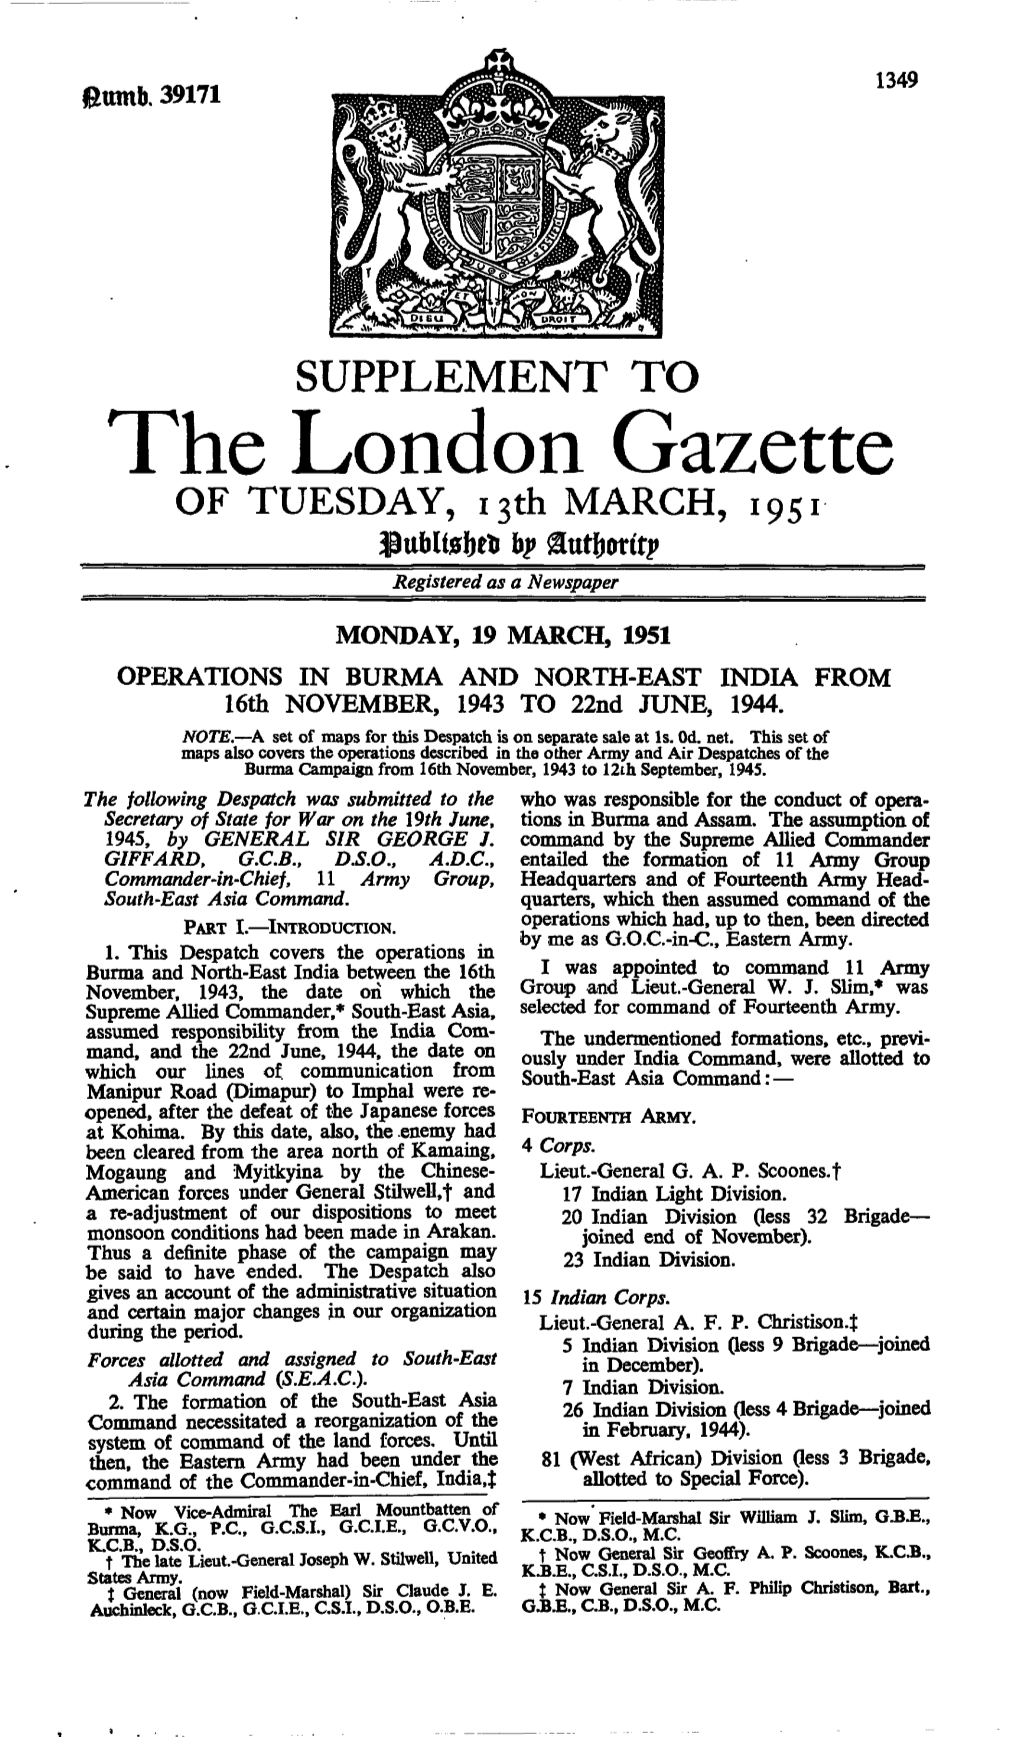 SUPPLEMENT to the London Gazette of TUESDAY, I3th MARCH, 1951 Bp Gutftortq> Registered As a Newspaper